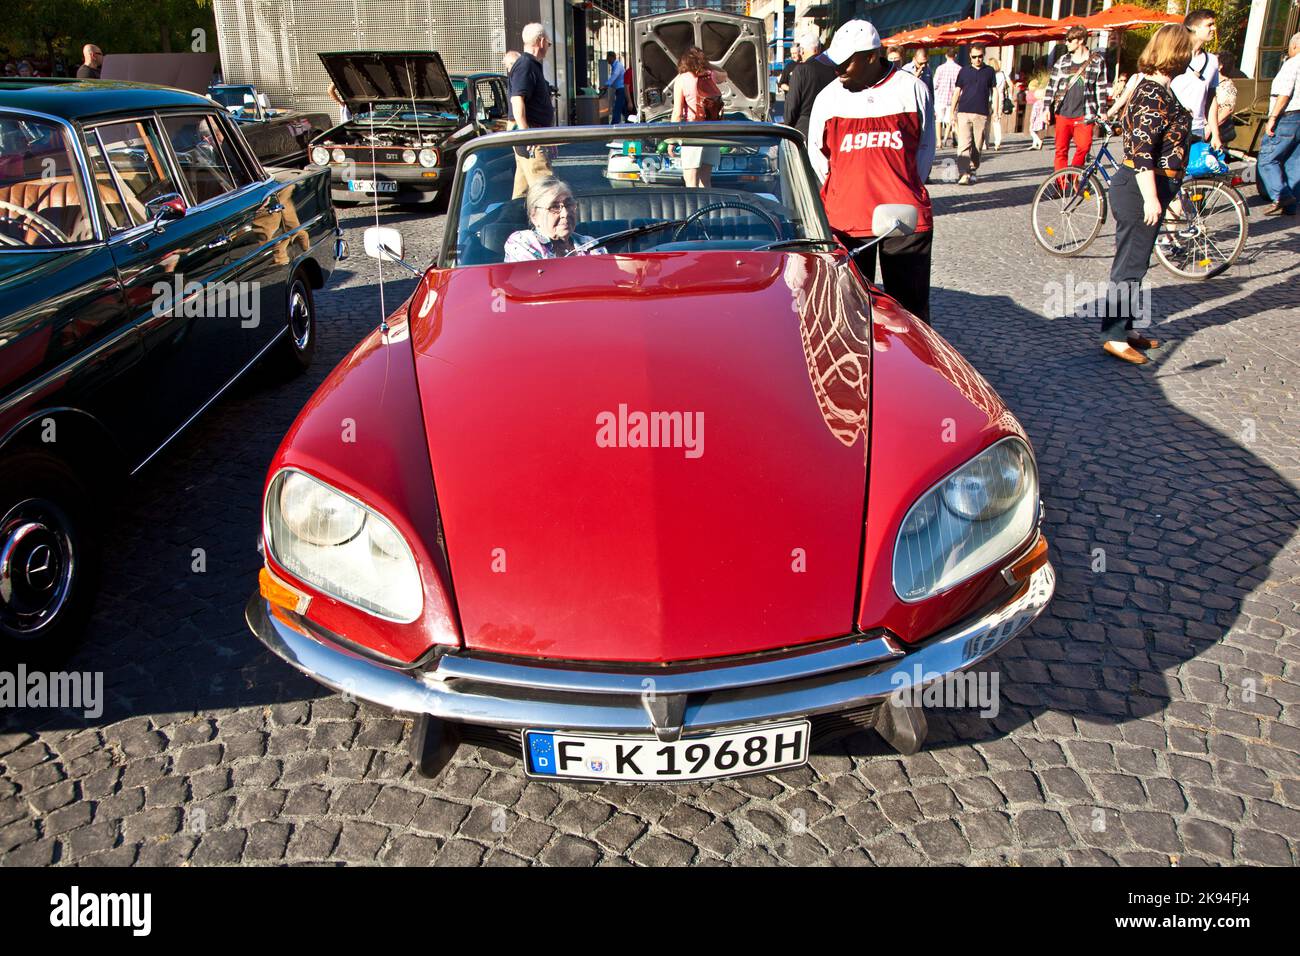 Frankfurt, Germany - October 2,2011:   Oldtimer Meeting in Frankfurt, Germany. A Citroen CV Oldtimer presented by the event '7. Oldtimercity' organize Stock Photo